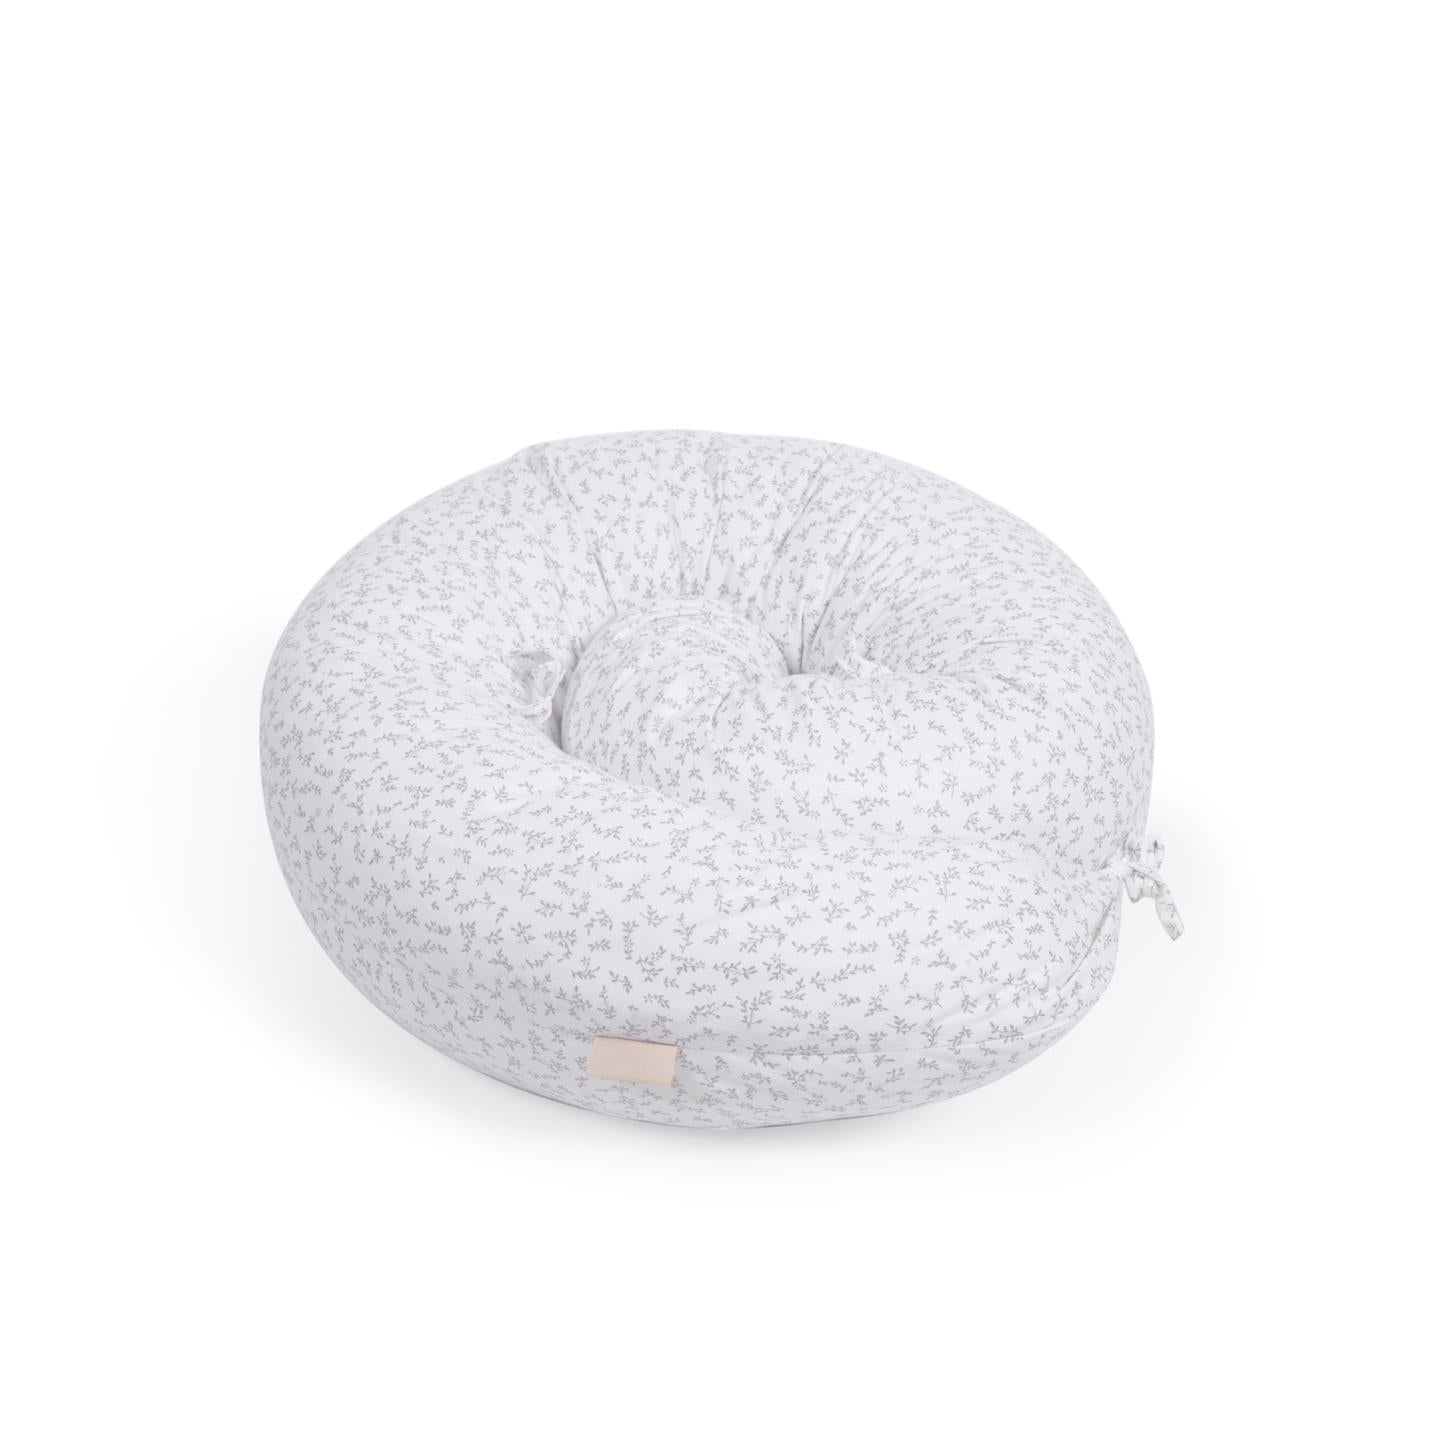 Yamile nursing pillow 100% organic cotton (GOTS) in white with grey leaves